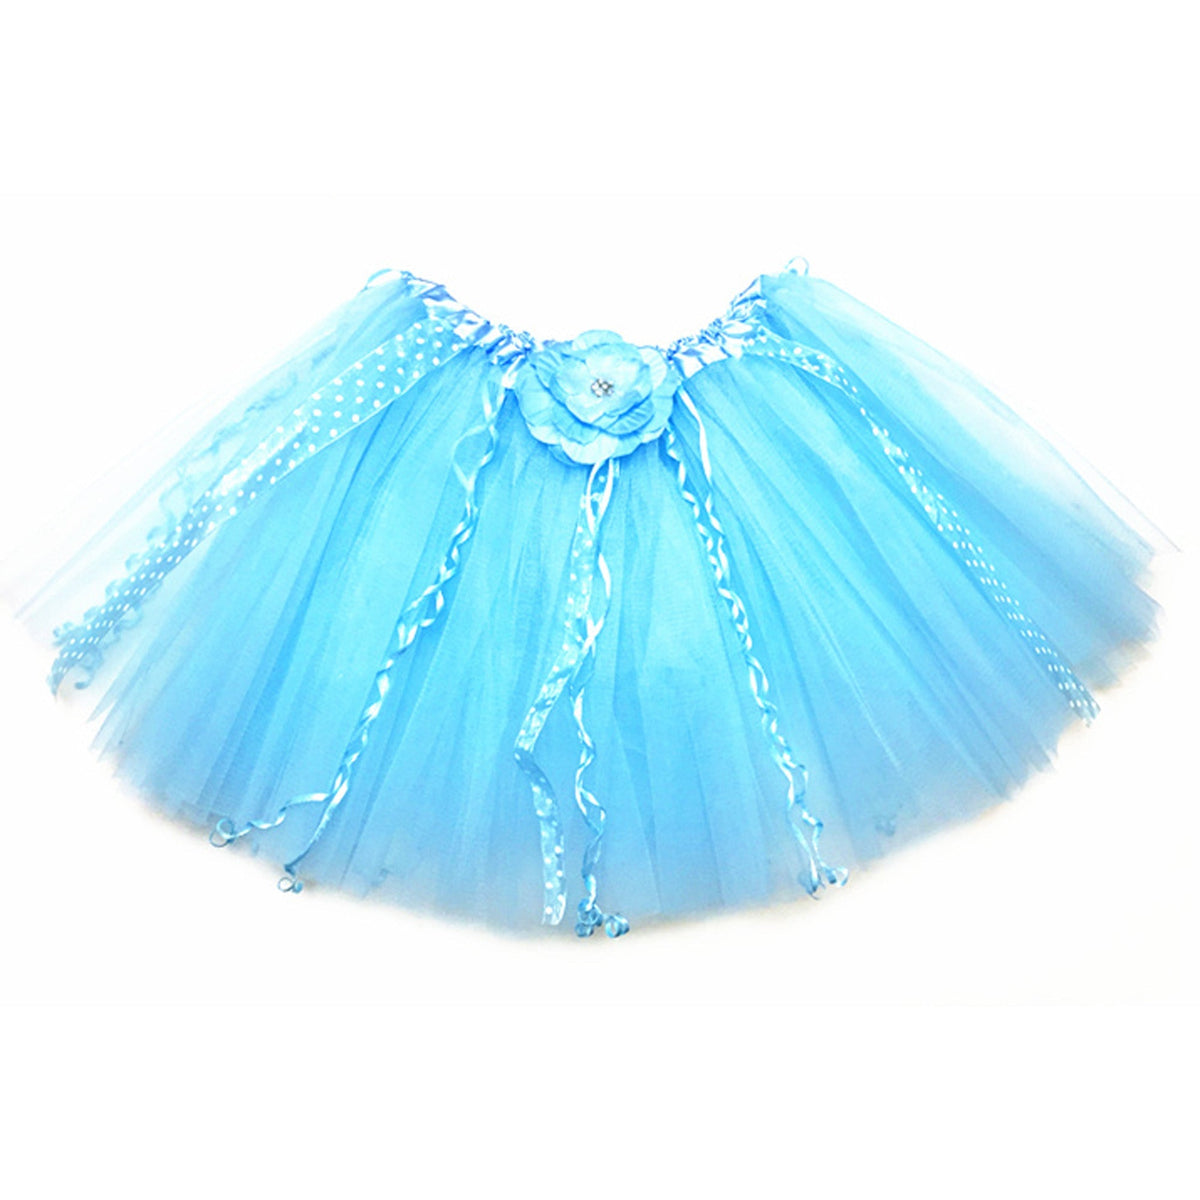 IVY TRADING INC. Costume Accessories Blue Tutu for Kids 9790000017207